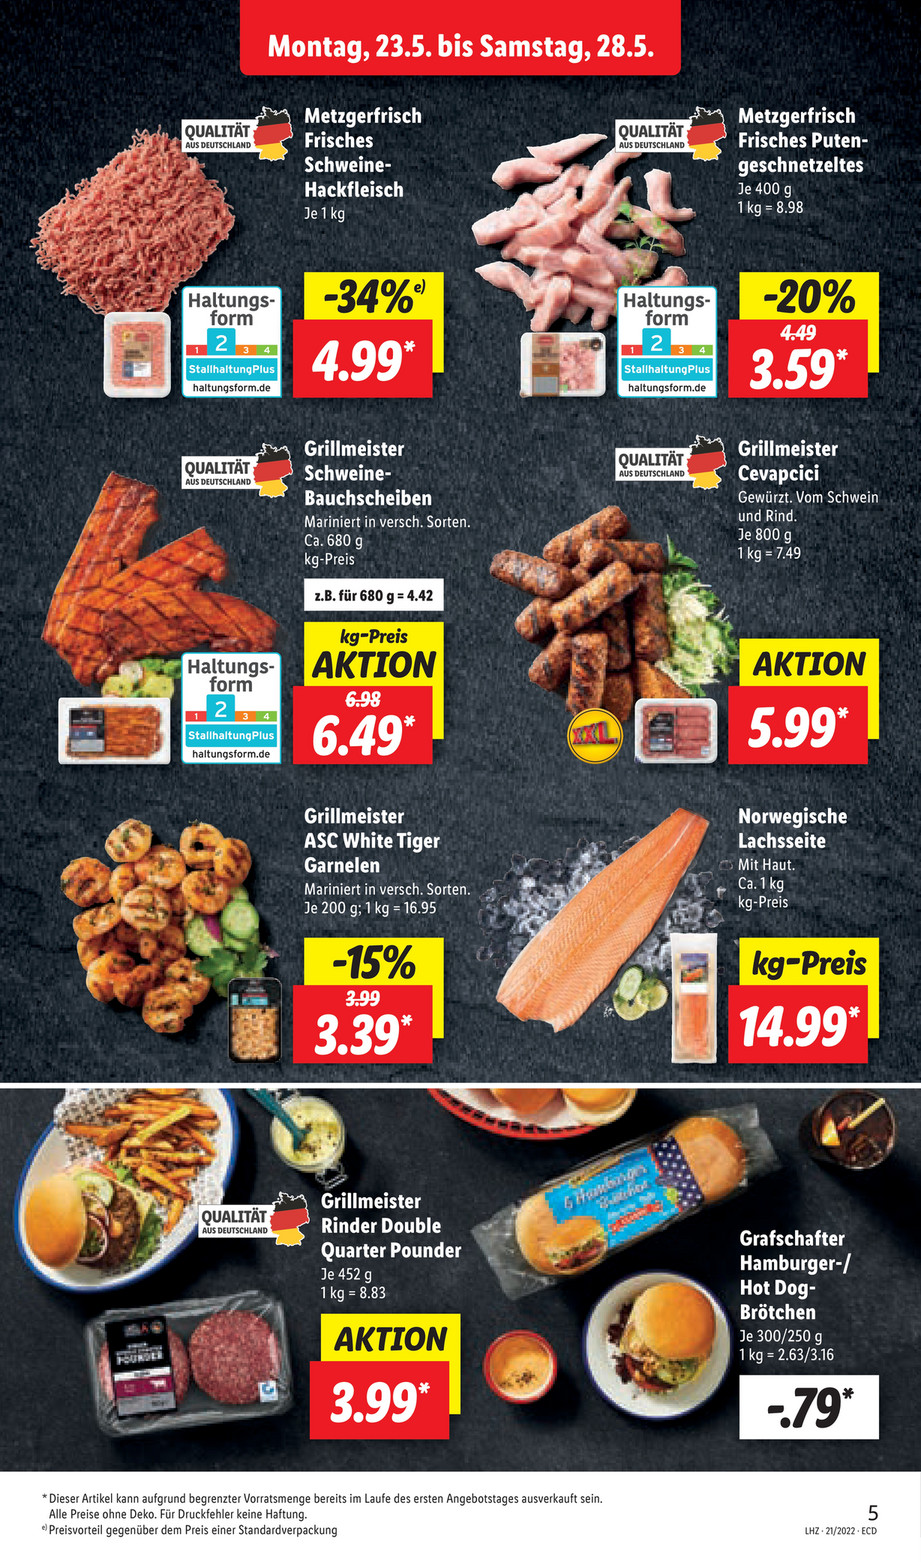 Seite publications - Created My - lidl220523 - with 1